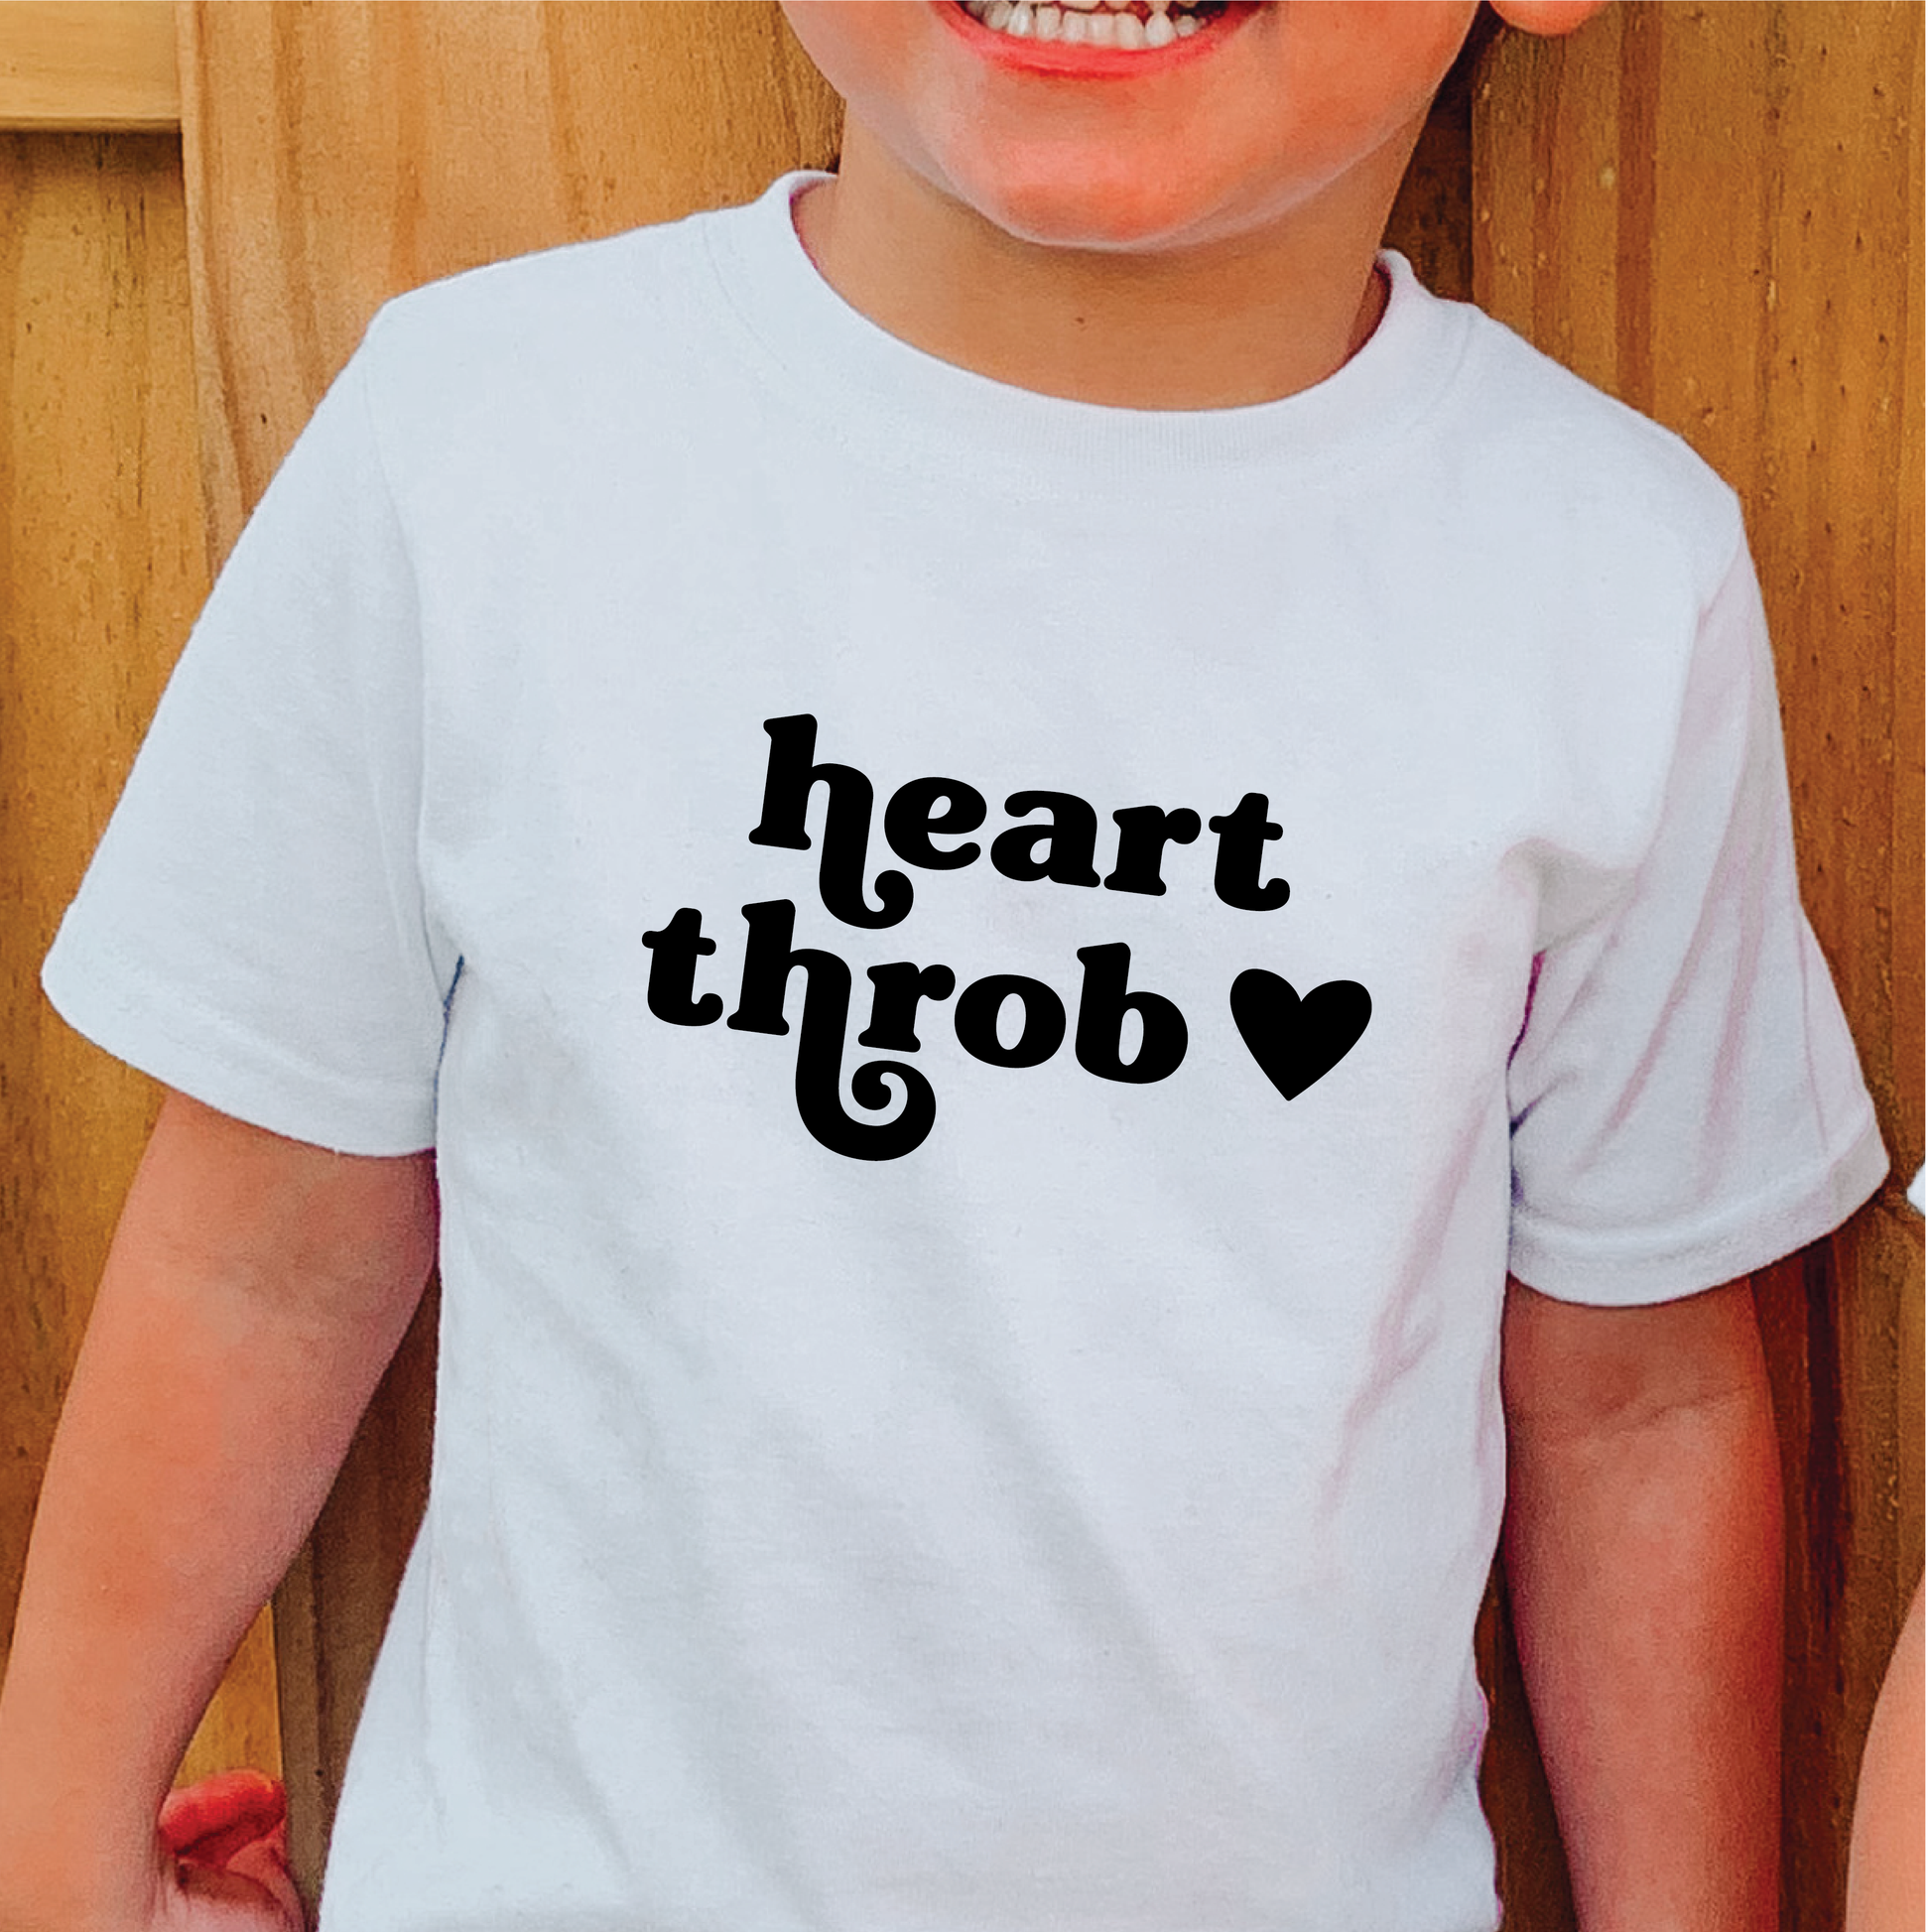 Heart Throb Photos and Images